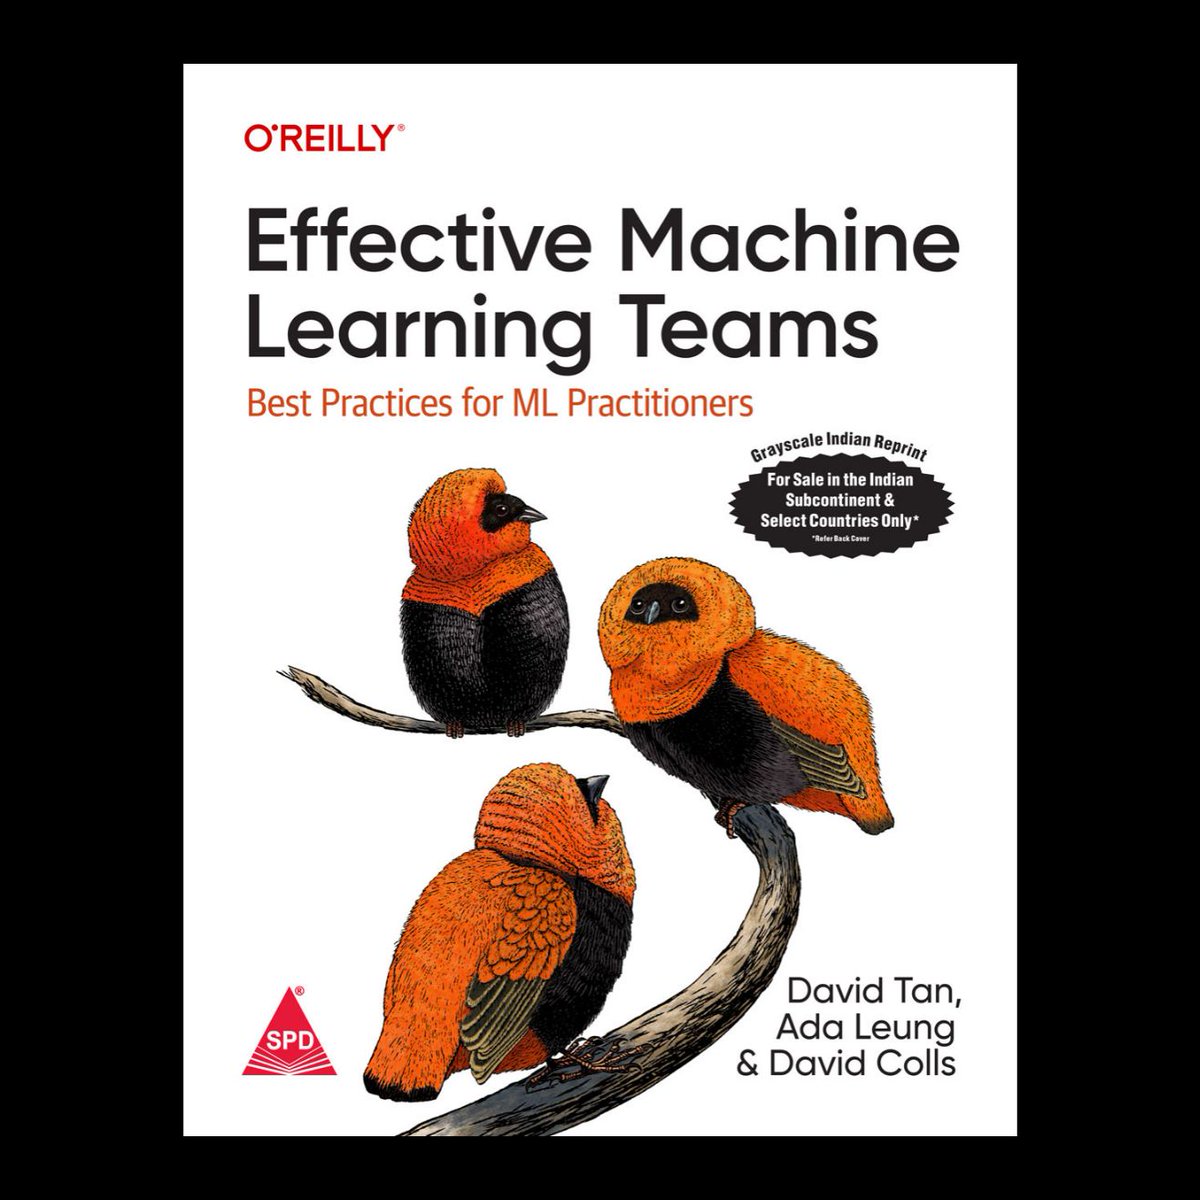 Releasing Soon !!!
Effective Machine Learning Teams
Best Practices for ML Practitioners
By David Tan, Ada Leung, David Colls 
This book will help your team avoid common traps in the ML world.
Pre-order now
shroffpublishers.com/books/97893554…
#machinelearning  #oreilly #shroffpublishers